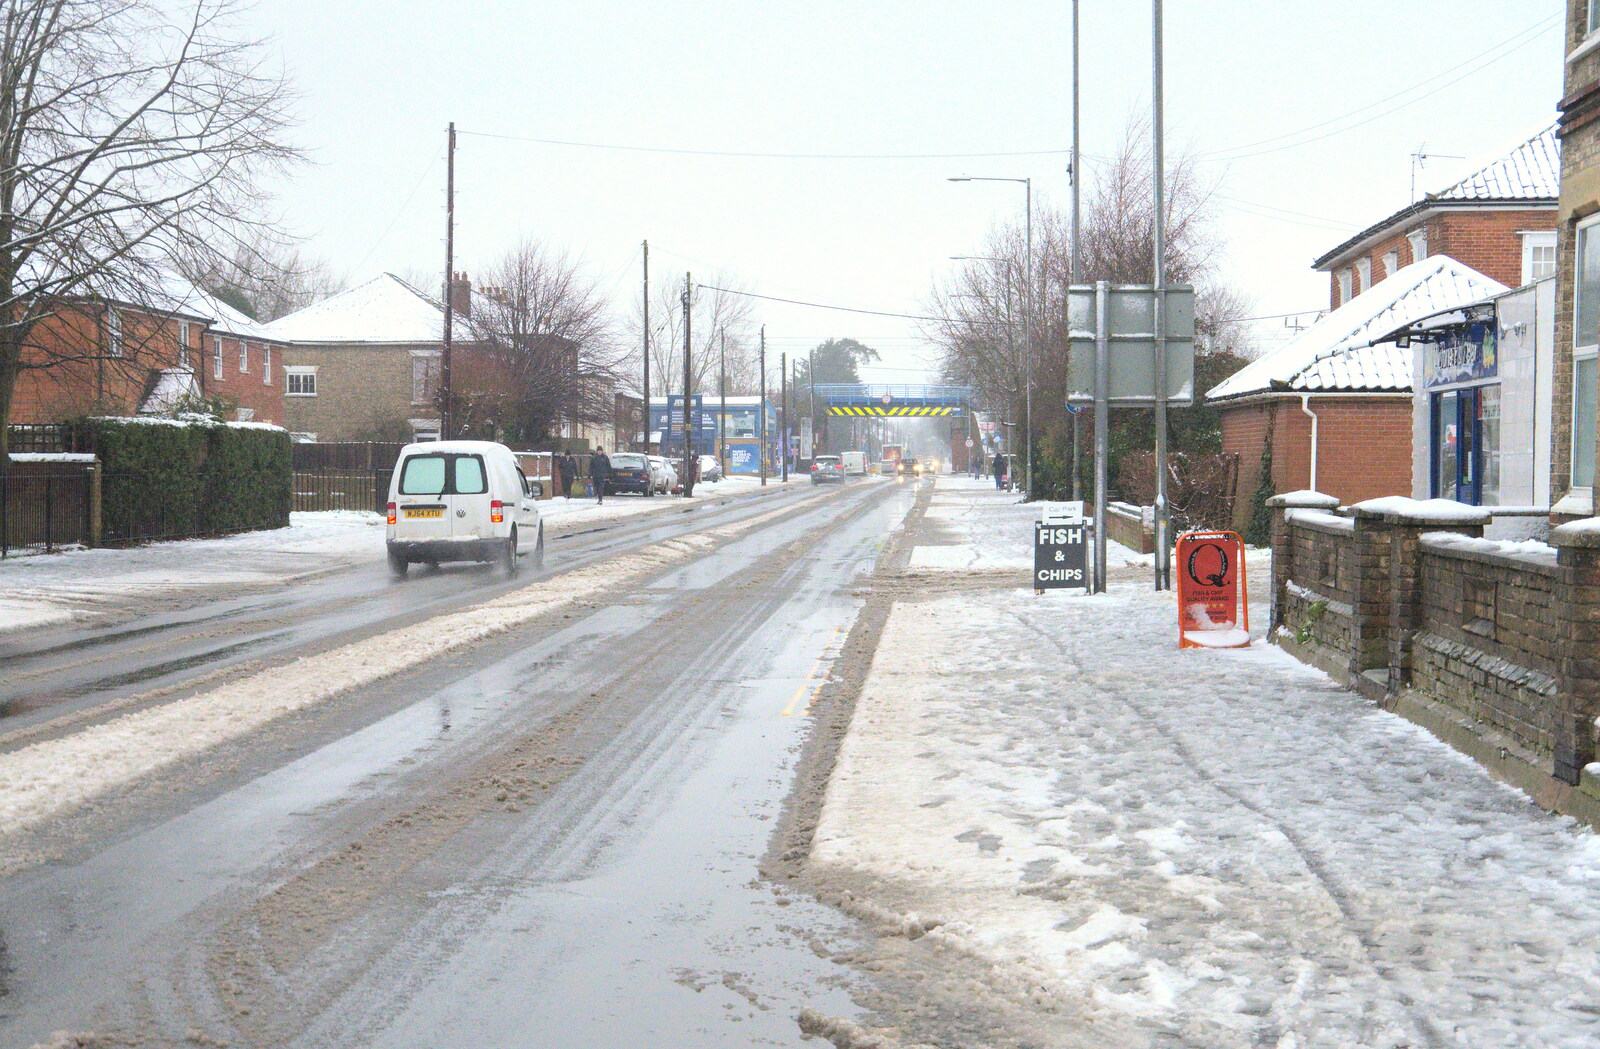 Victoria Road towards Diss, and the railway bridge from A Snowy Morning, Diss, Norfolk - 16th January 2021